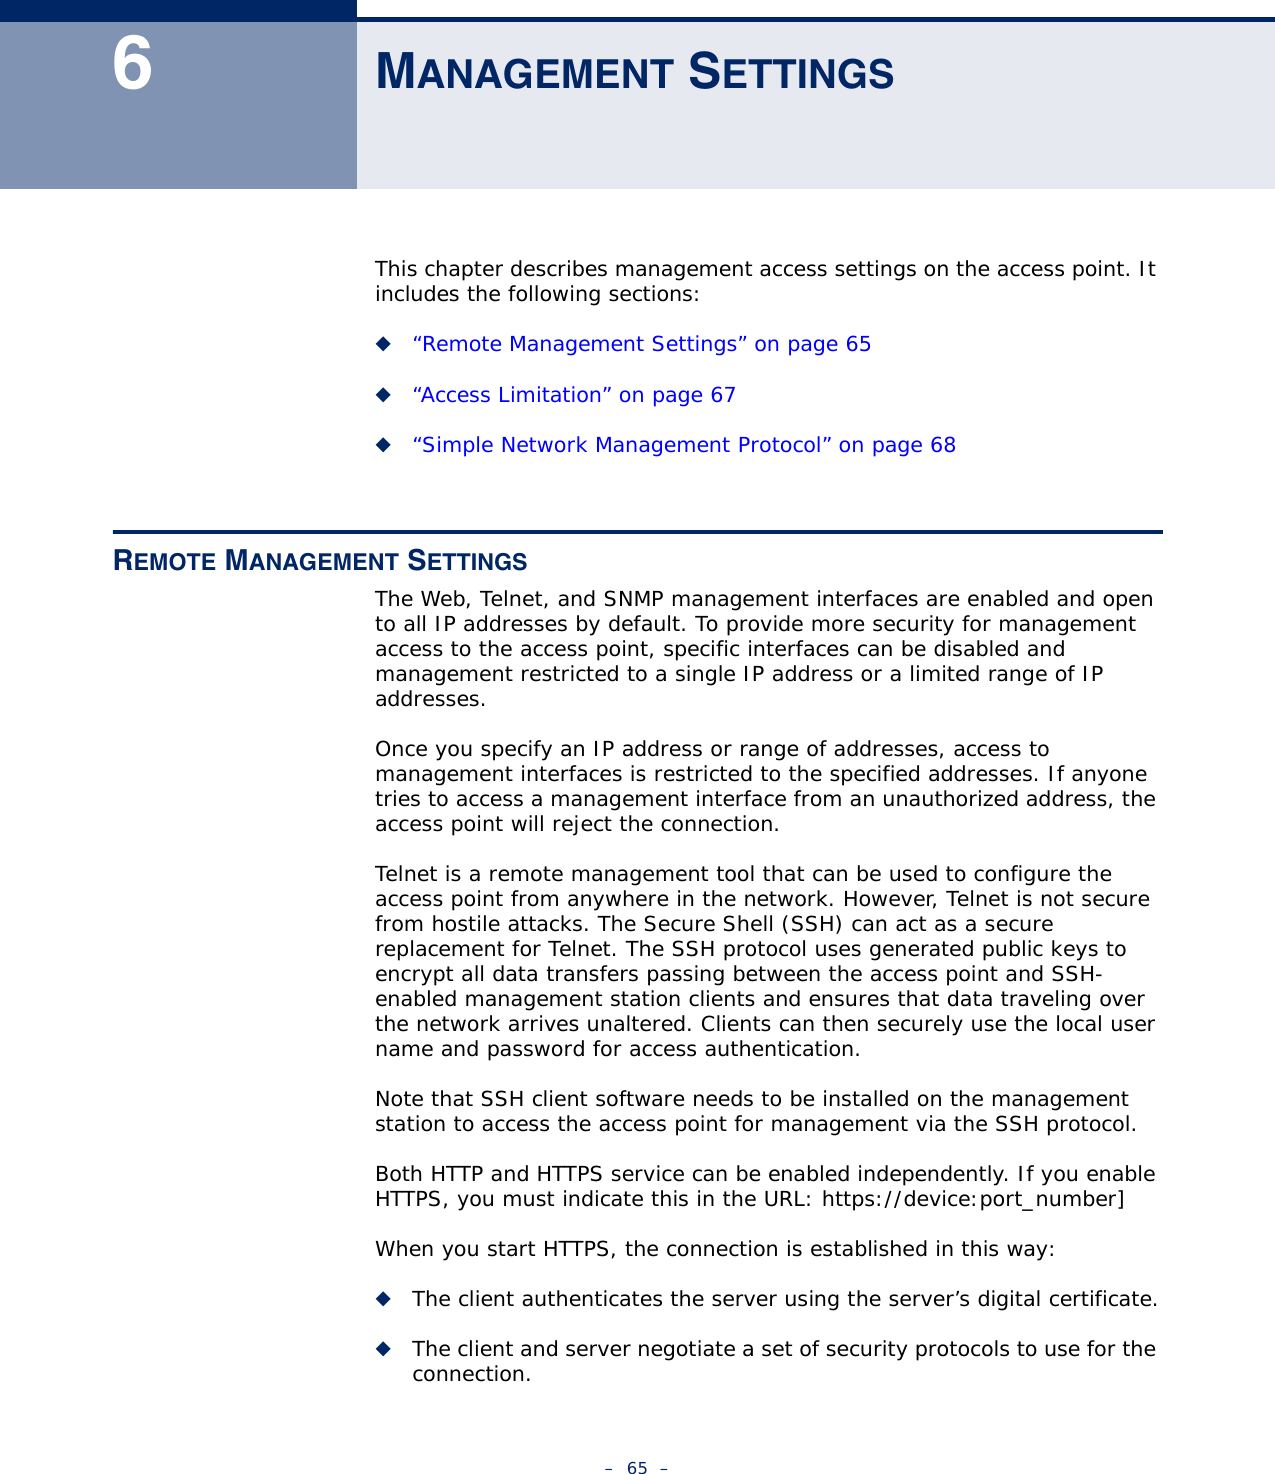 –  65  –6MANAGEMENT SETTINGSThis chapter describes management access settings on the access point. It includes the following sections:◆“Remote Management Settings” on page 65◆“Access Limitation” on page 67◆“Simple Network Management Protocol” on page 68REMOTE MANAGEMENT SETTINGSThe Web, Telnet, and SNMP management interfaces are enabled and open to all IP addresses by default. To provide more security for management access to the access point, specific interfaces can be disabled and management restricted to a single IP address or a limited range of IP addresses.Once you specify an IP address or range of addresses, access to management interfaces is restricted to the specified addresses. If anyone tries to access a management interface from an unauthorized address, the access point will reject the connection.Telnet is a remote management tool that can be used to configure the access point from anywhere in the network. However, Telnet is not secure from hostile attacks. The Secure Shell (SSH) can act as a secure replacement for Telnet. The SSH protocol uses generated public keys to encrypt all data transfers passing between the access point and SSH-enabled management station clients and ensures that data traveling over the network arrives unaltered. Clients can then securely use the local user name and password for access authentication.Note that SSH client software needs to be installed on the management station to access the access point for management via the SSH protocol.Both HTTP and HTTPS service can be enabled independently. If you enable HTTPS, you must indicate this in the URL: https://device:port_number]When you start HTTPS, the connection is established in this way:◆The client authenticates the server using the server’s digital certificate.◆The client and server negotiate a set of security protocols to use for the connection.